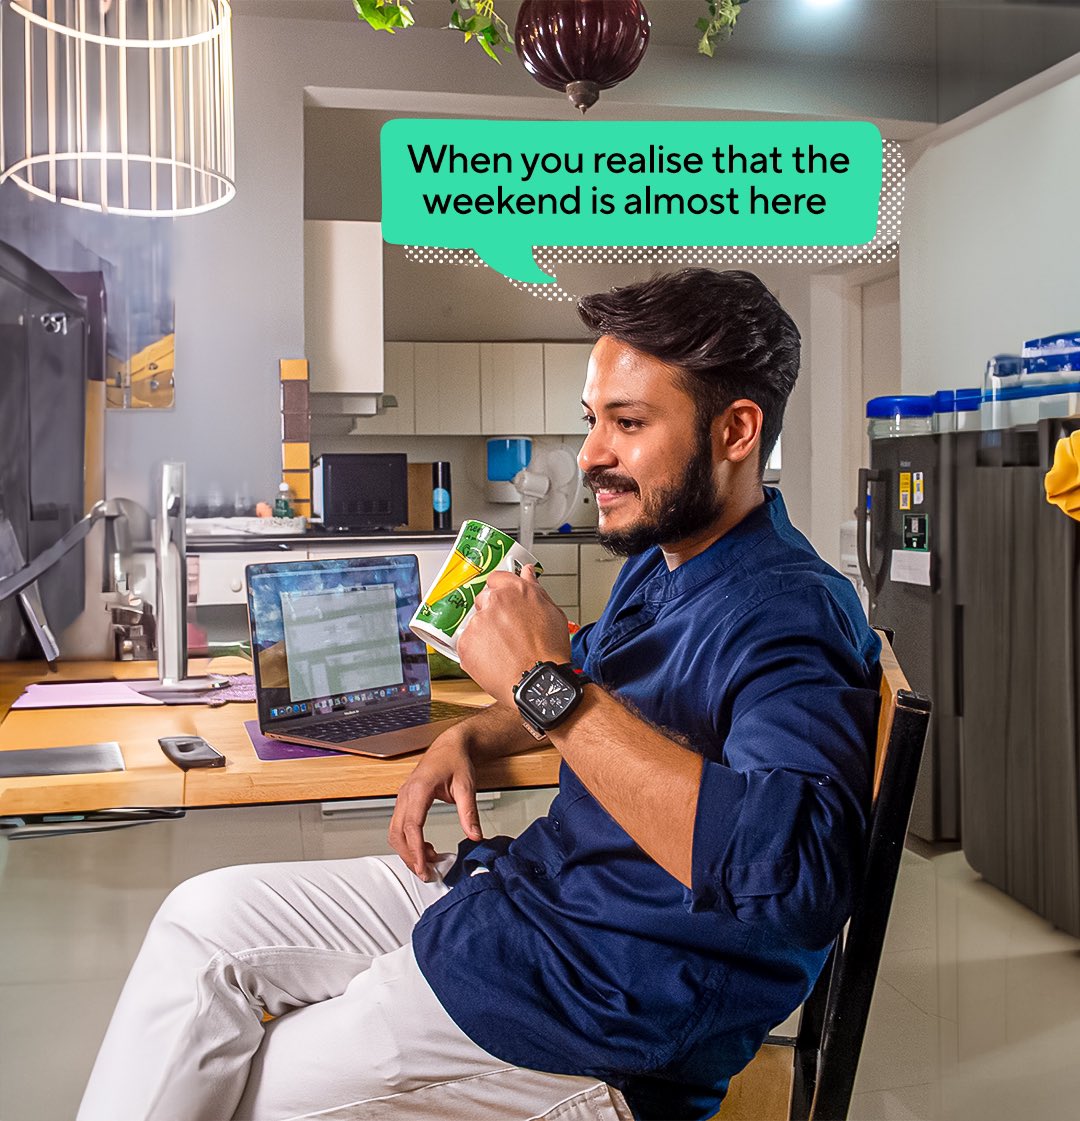 Just that one approval and we are good to go! #FridayVibes 

.
.
.

#bostonliving #hyderabad #hyderabadcoliving #millenials #coliving #friends #livingspace #housing #coolspace #singles #accomodation #workmemes #workworkworkworkwork #fridaymood #corporatememes